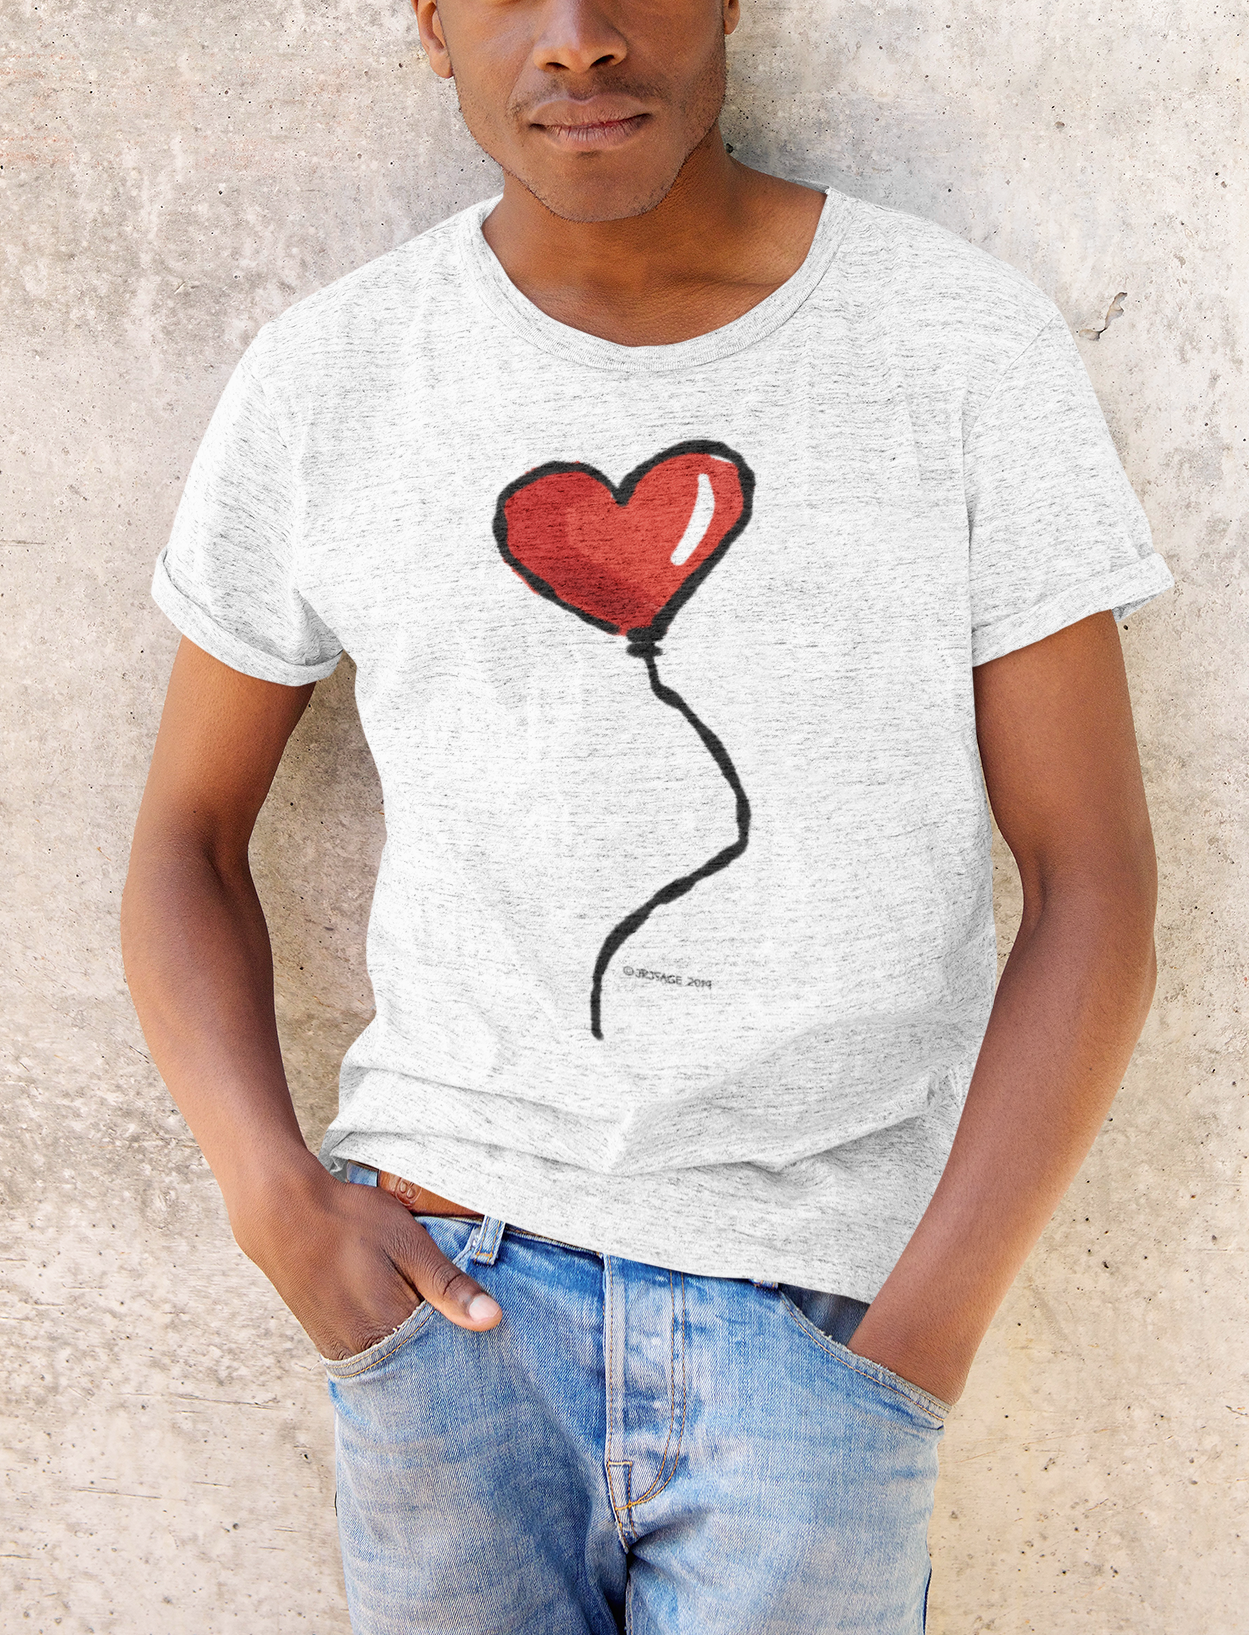 Man wearing a Red Heart Balloon I Love you T-shirt design printed on a cream heather grey colour vegan cotton t-shirt by Hector and Bone